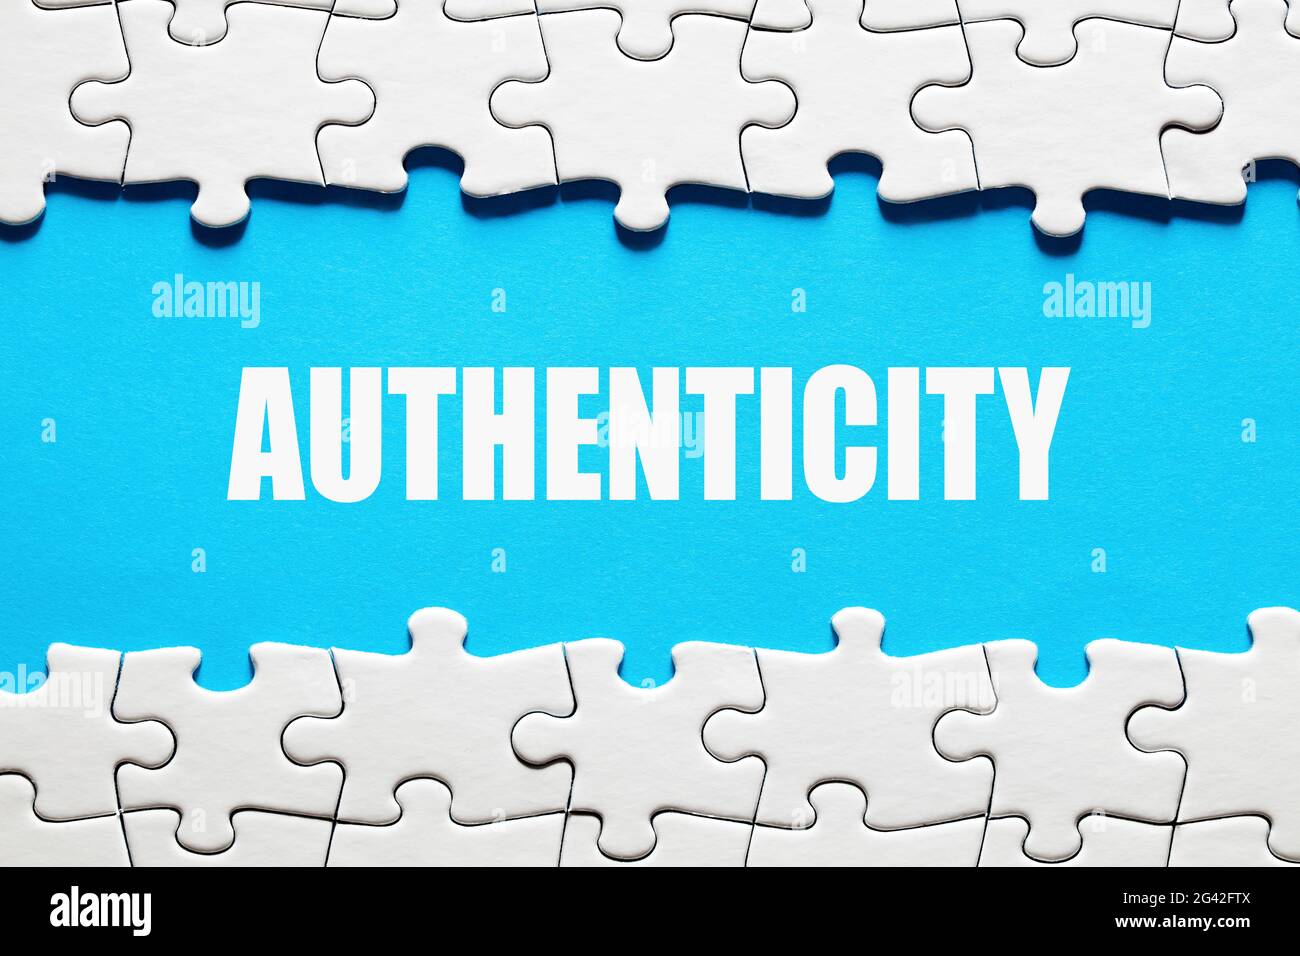 The word authenticity on blue background framed by jigsaw puzzle pieces. To discover or reveal the truth, reality or reliability concept. Stock Photo